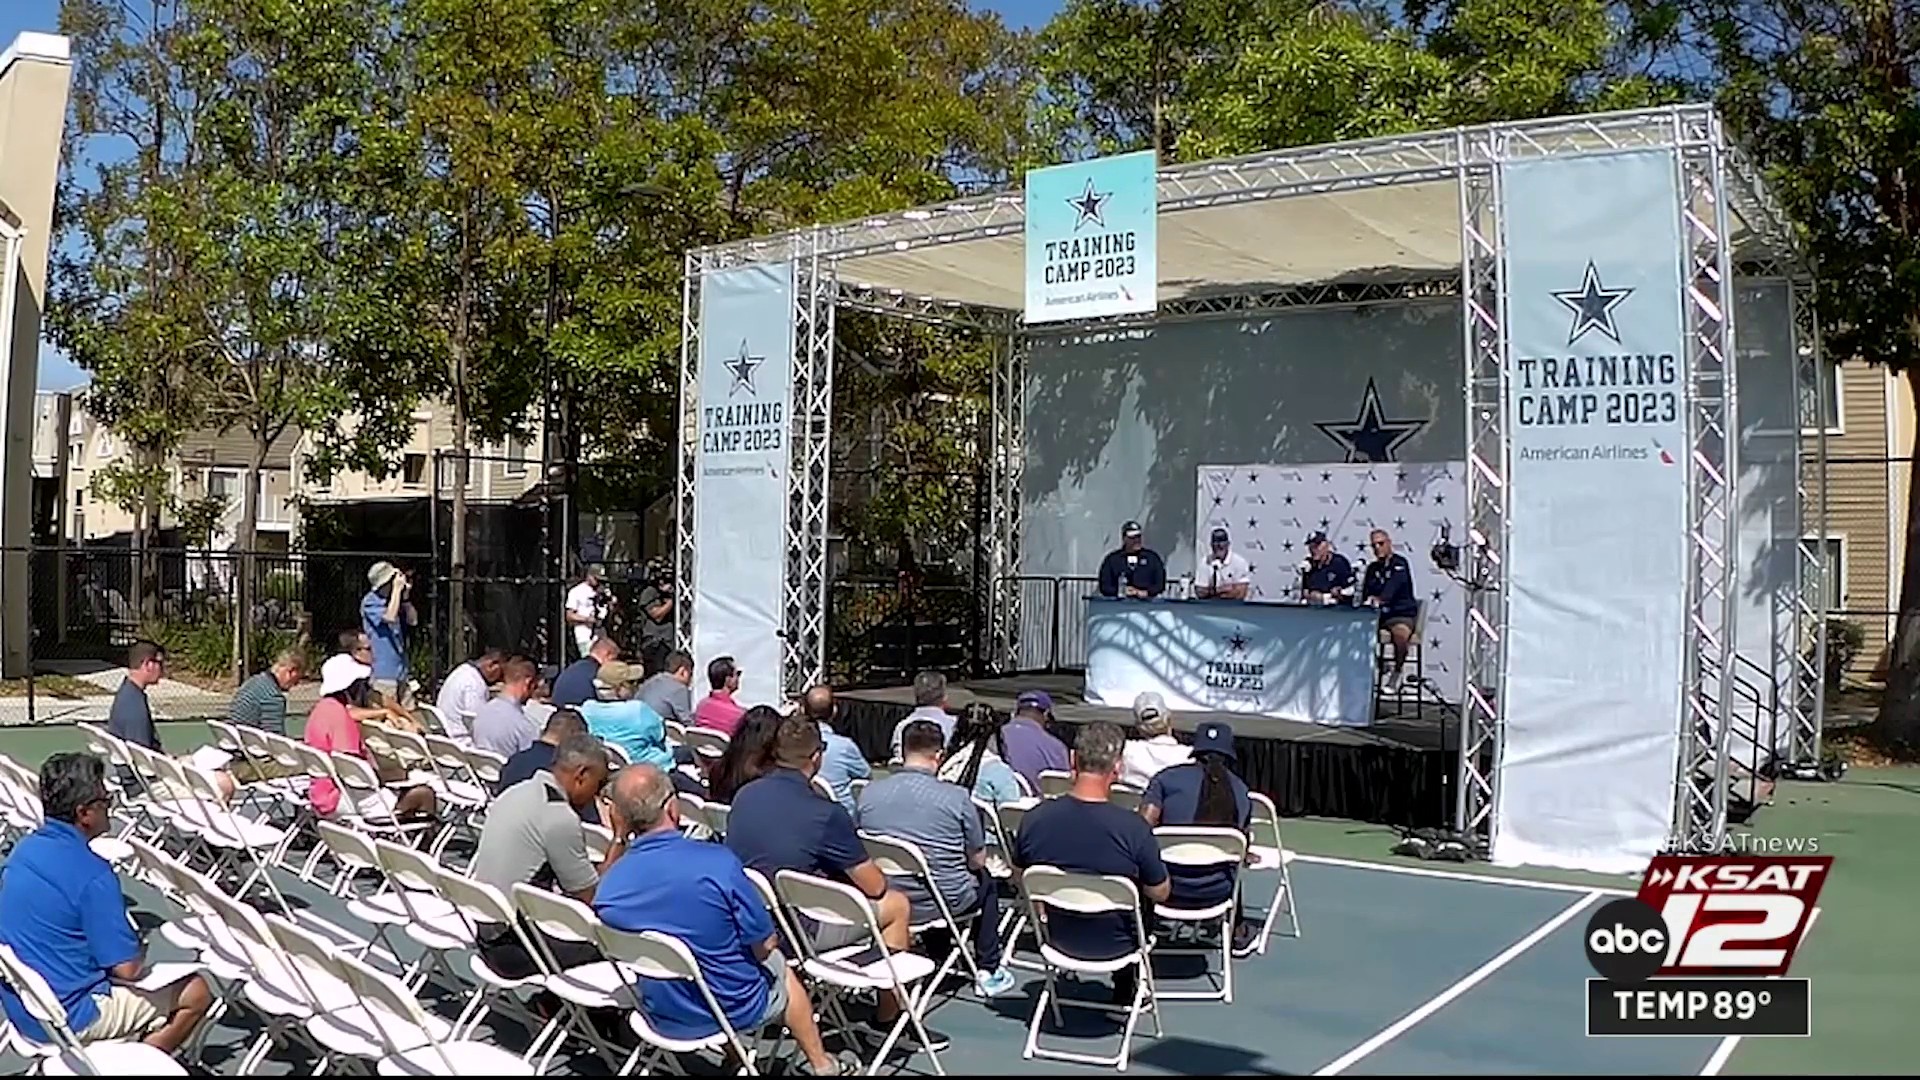 Dallas Cowboys kick off training camp with 'State of the Cowboys